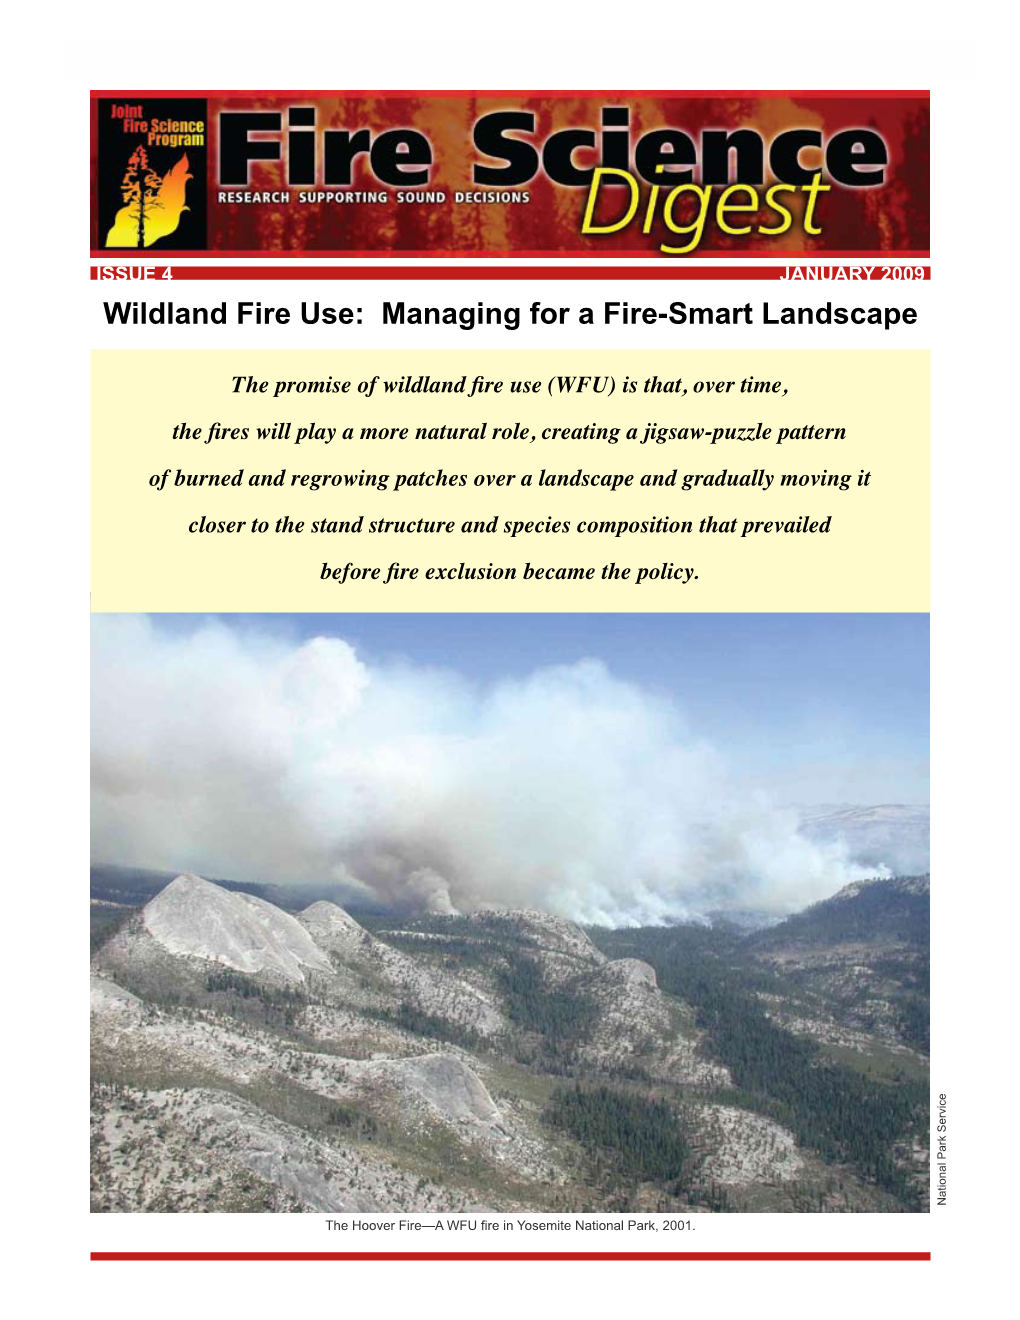 Wildland Fire Use: Managing for a Fire-Smart Landscape